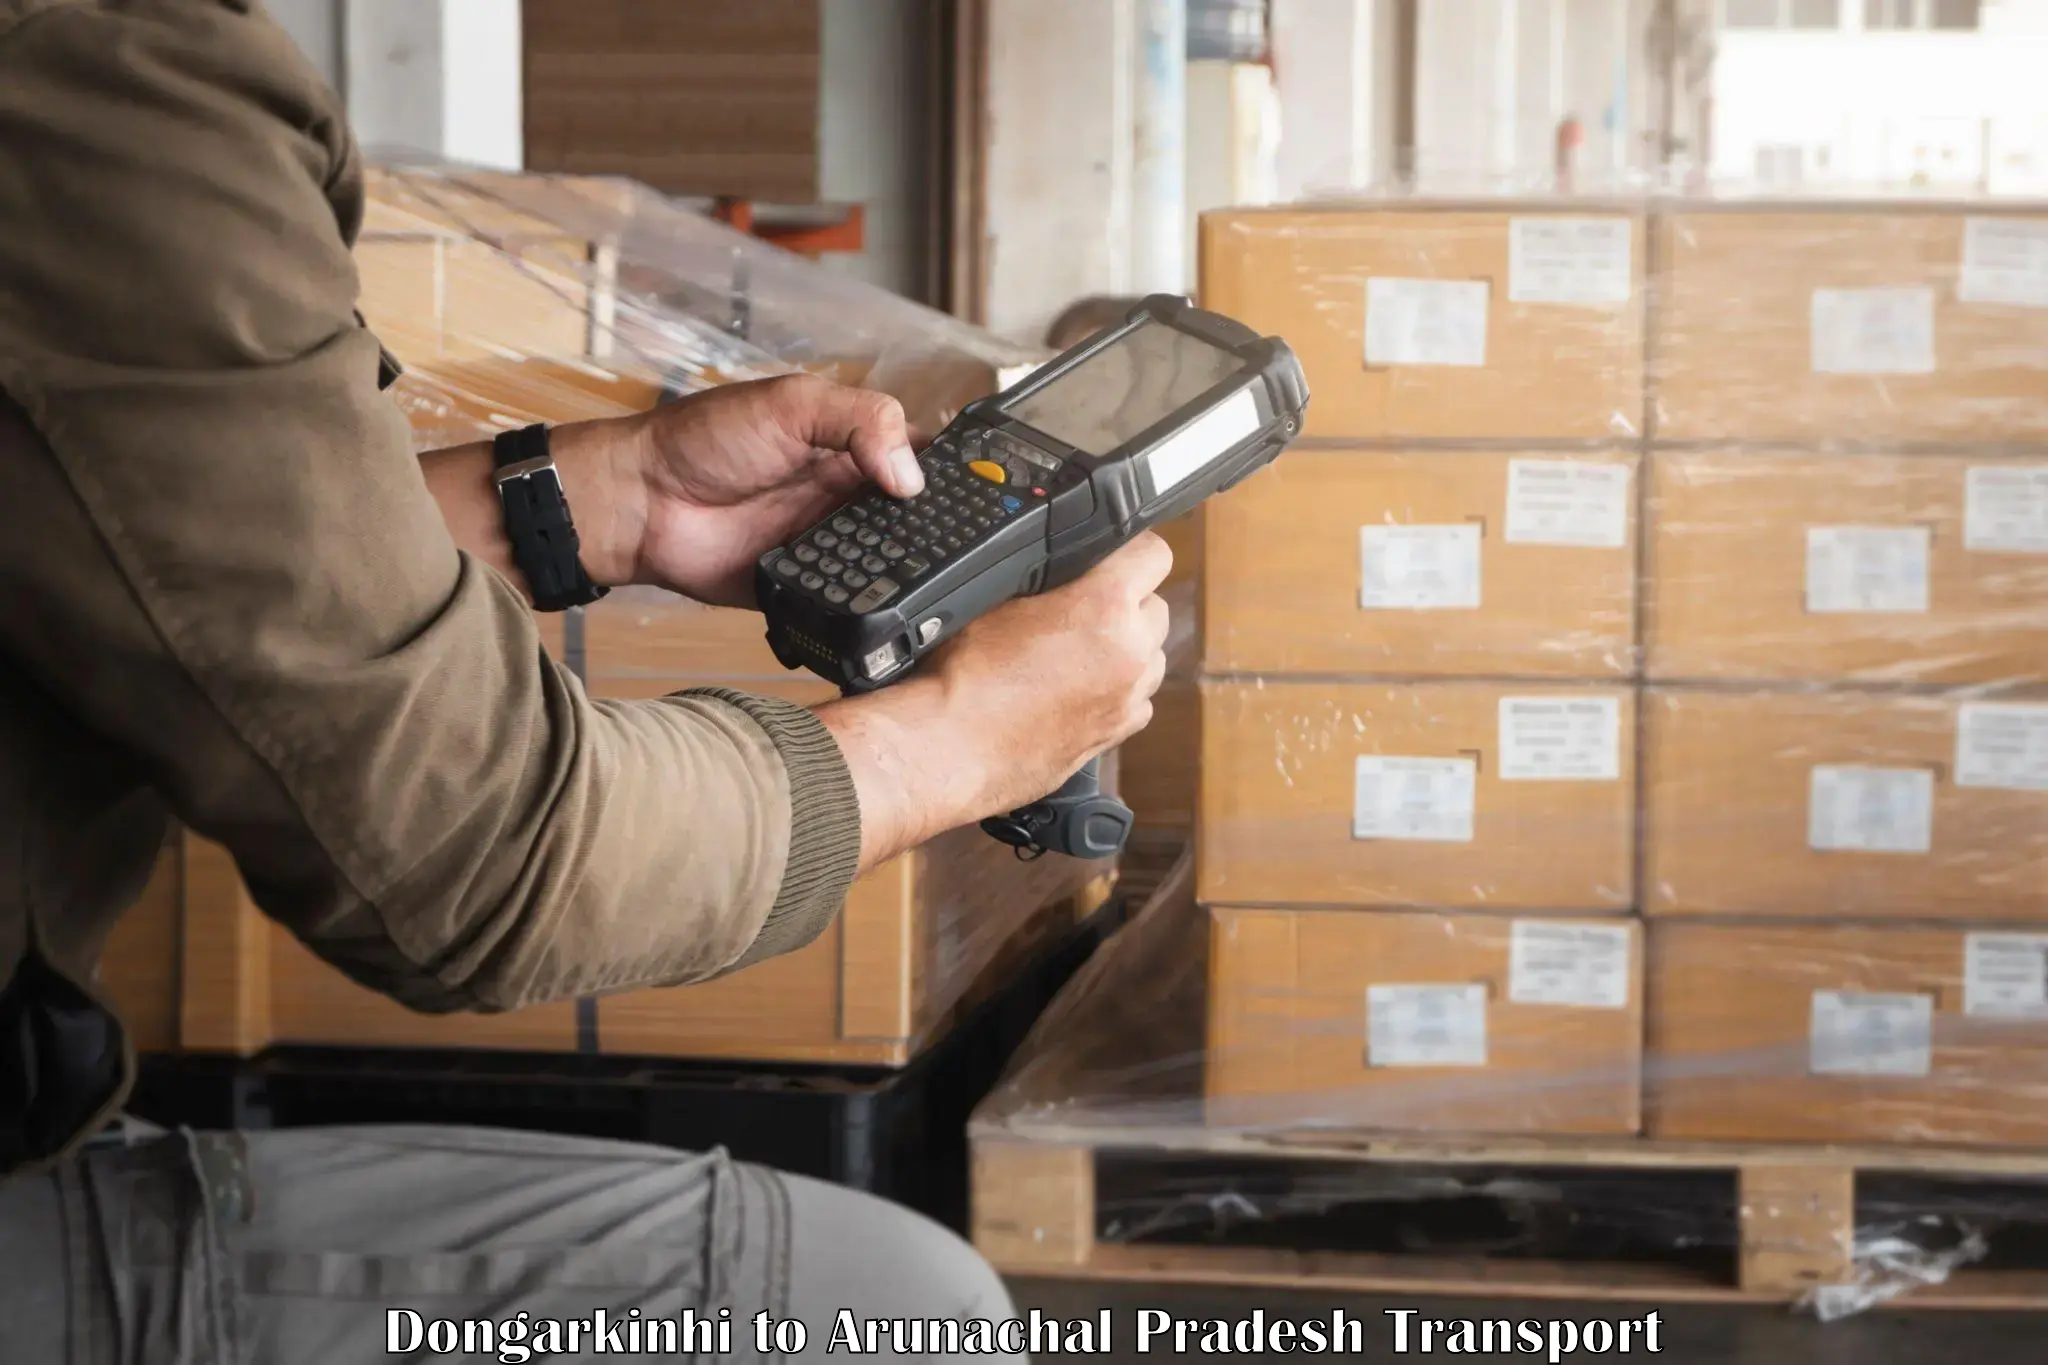 Package delivery services Dongarkinhi to Arunachal Pradesh